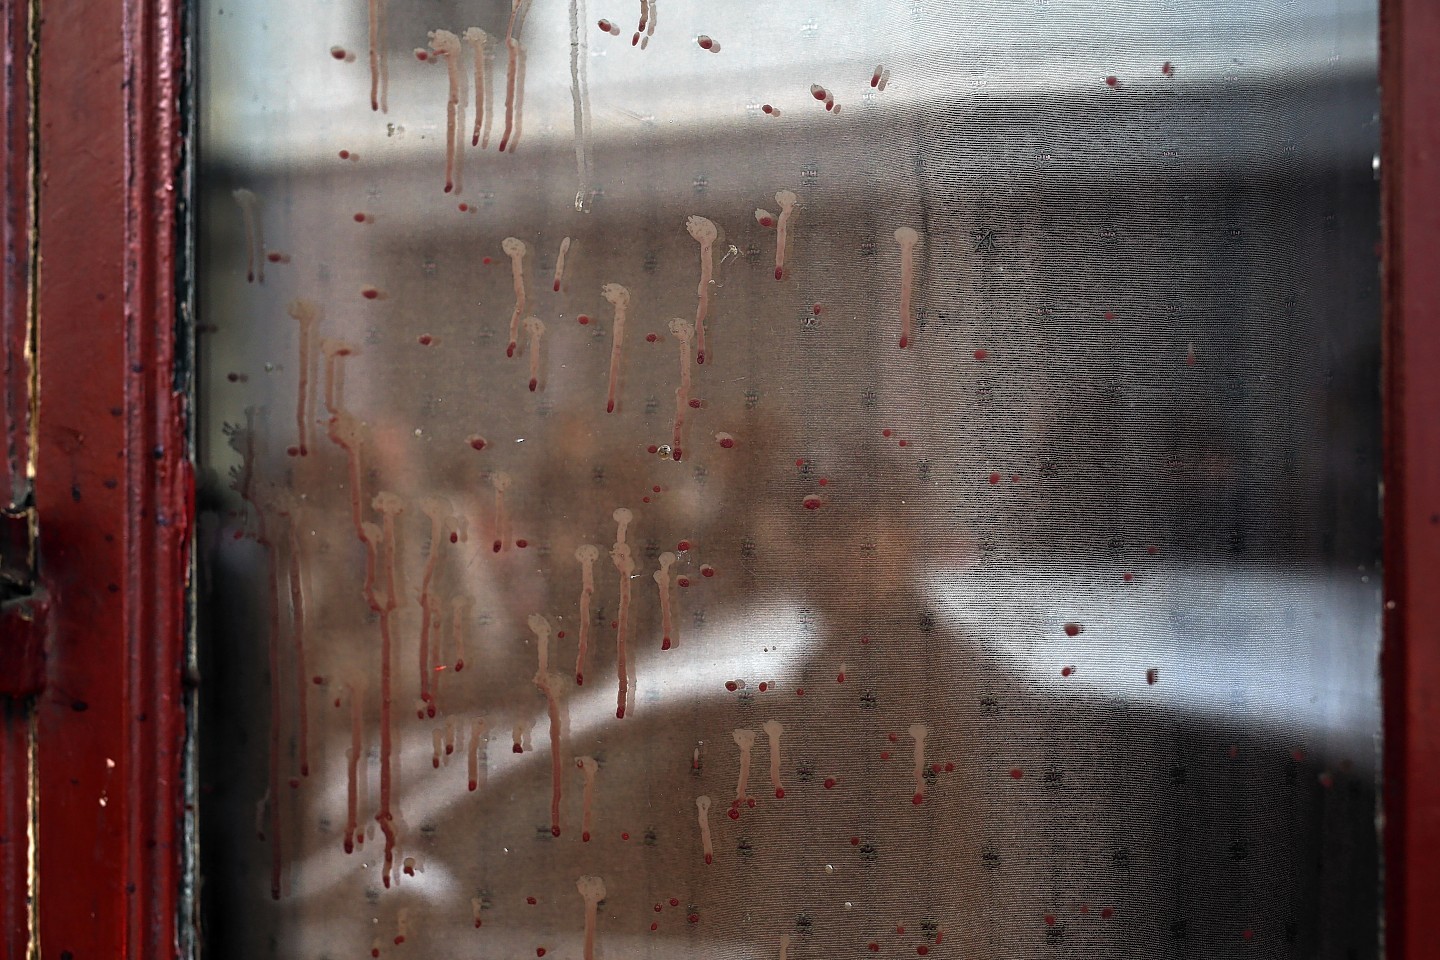 Dried blood can be seen on the window of  the Carillon cafe 